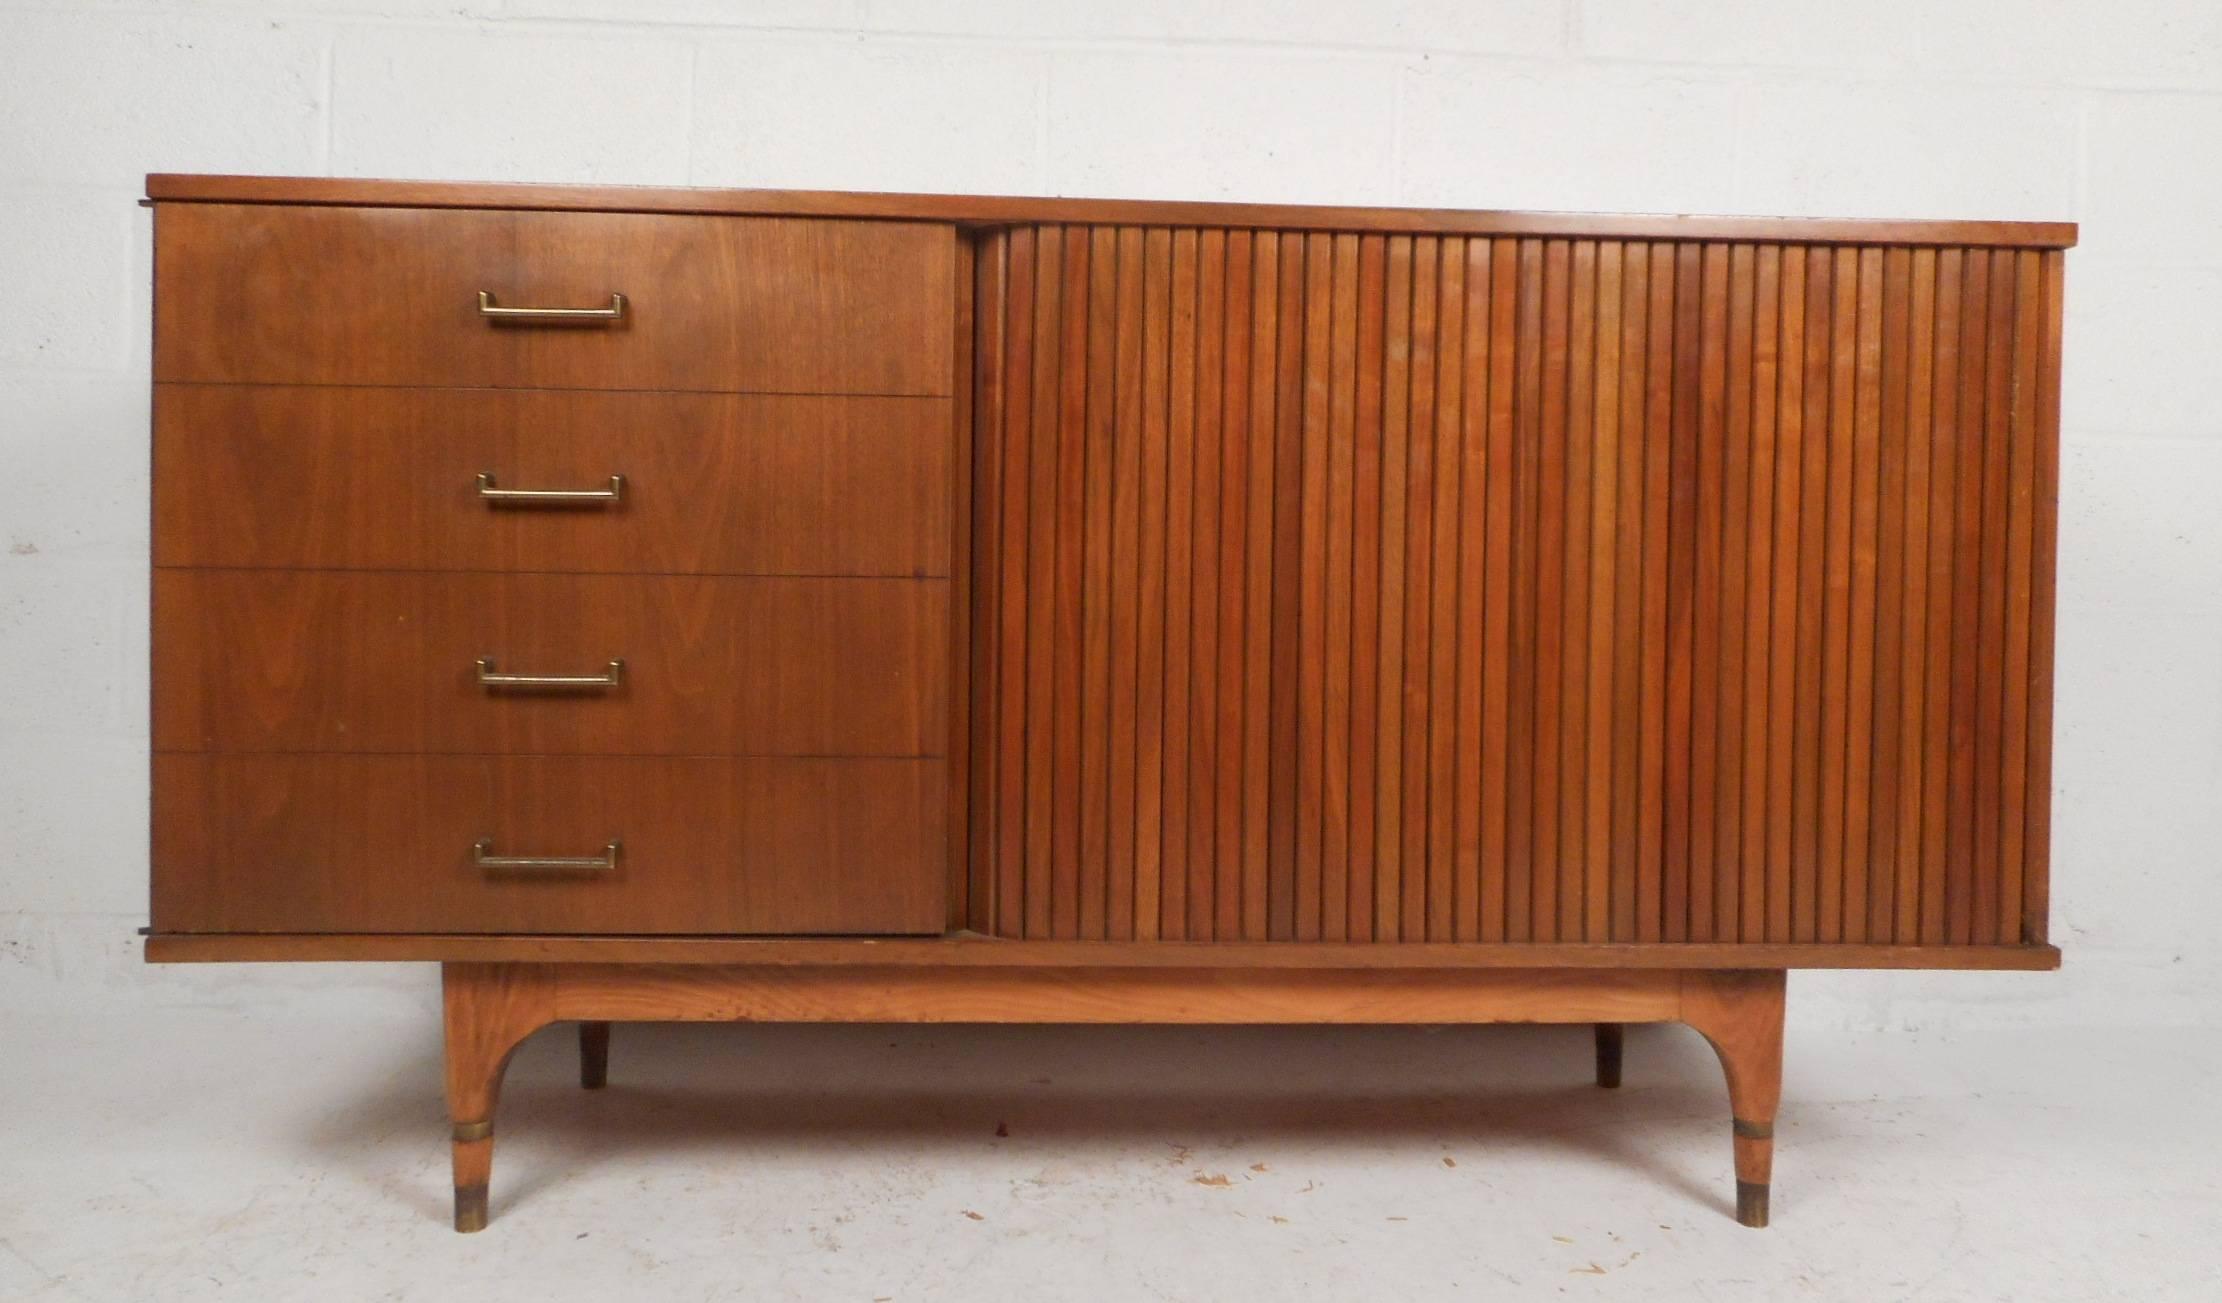 This gorgeous vintage modern credenza features six hidden drawers behind a cabinet and a tambour door. Unique cabinet door has appearance of four faux drawers with sculpted metal pulls. Sleek compact design has tapered legs with brass trim around